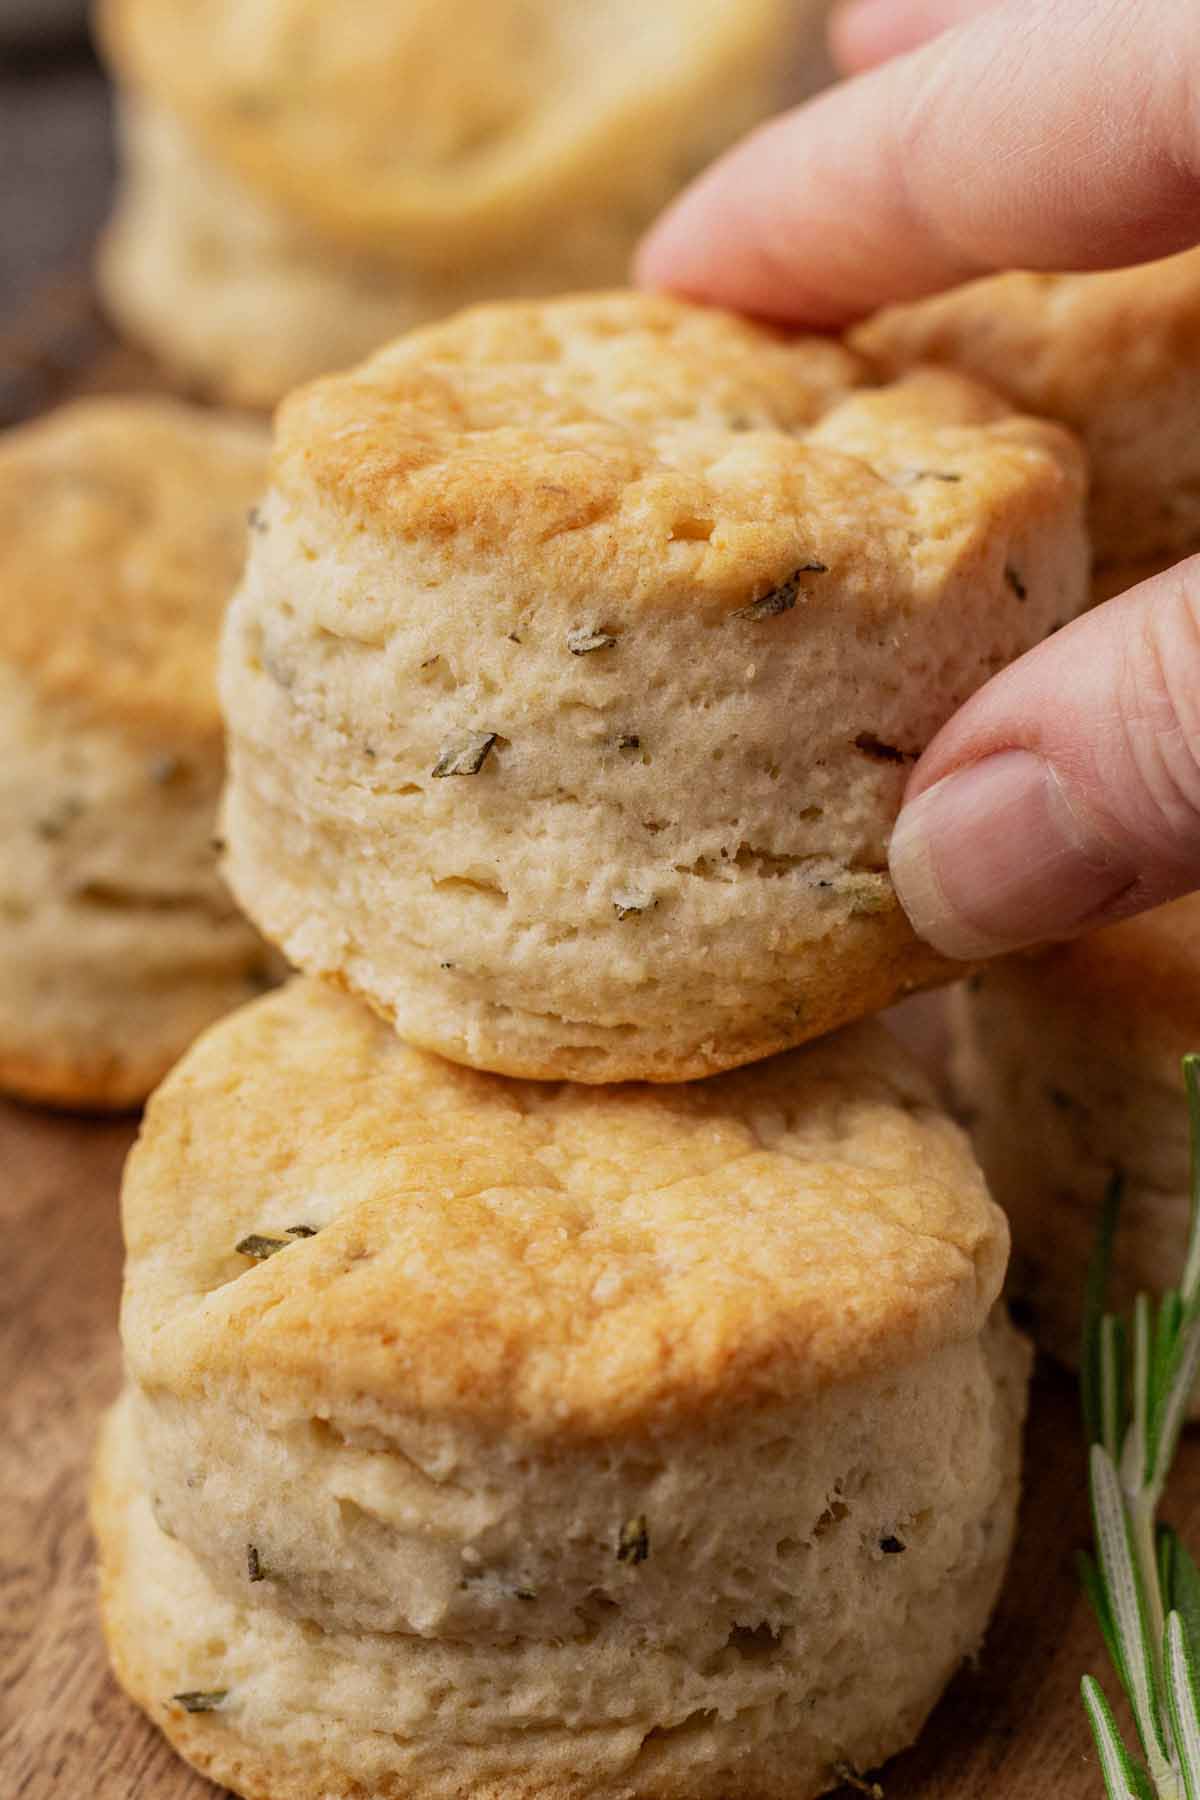 Stack of two rosemary biscuits with a hand reaching in to take one